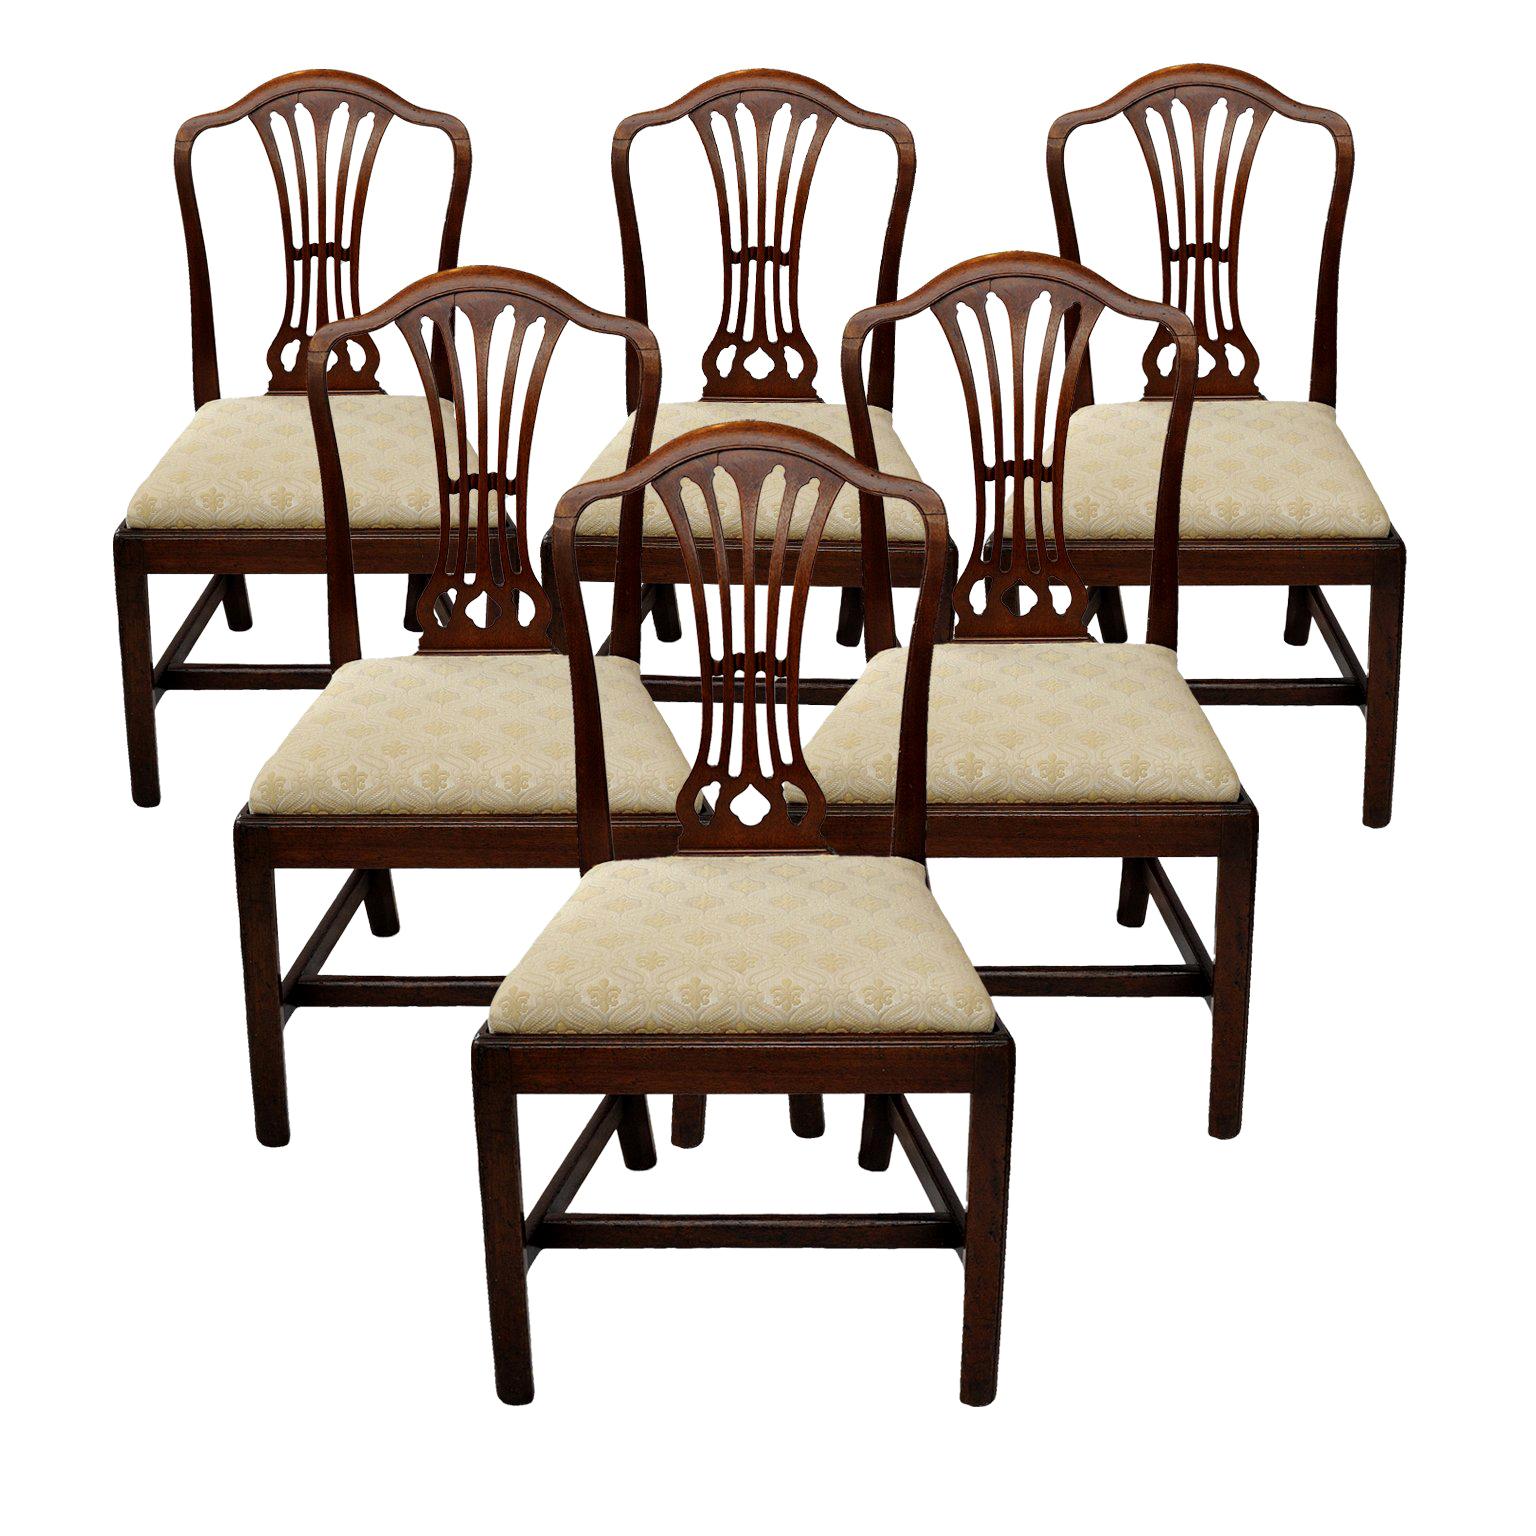 Set of Six George III Hepplewhite Style Mahogany Dining Chairs, circa 1780 For Sale